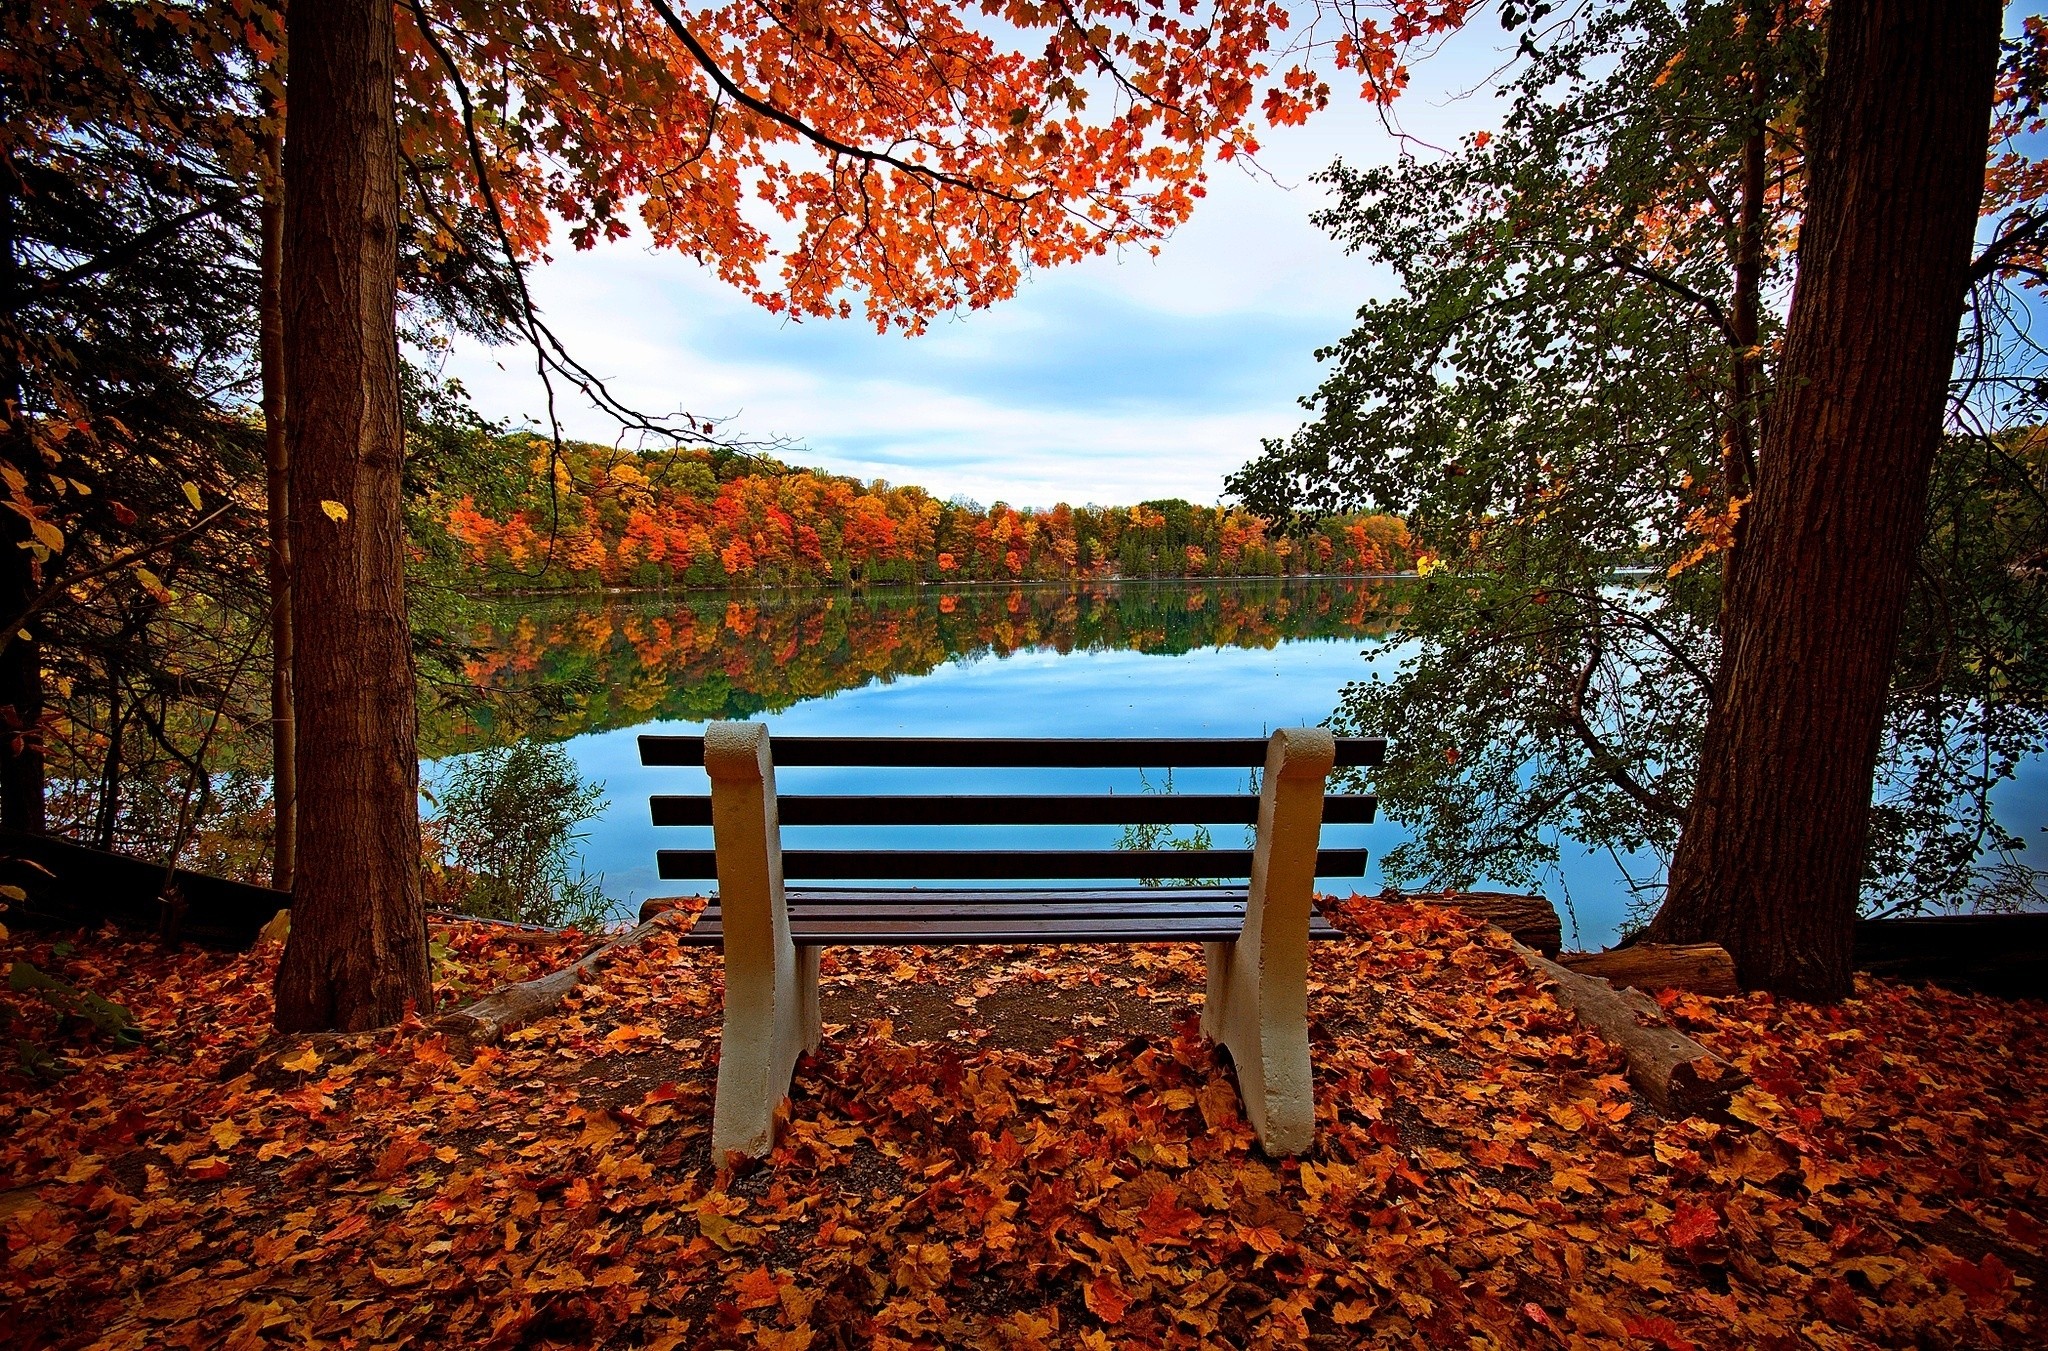 rivers, nature, autumn, trees, lake, bench High Definition image